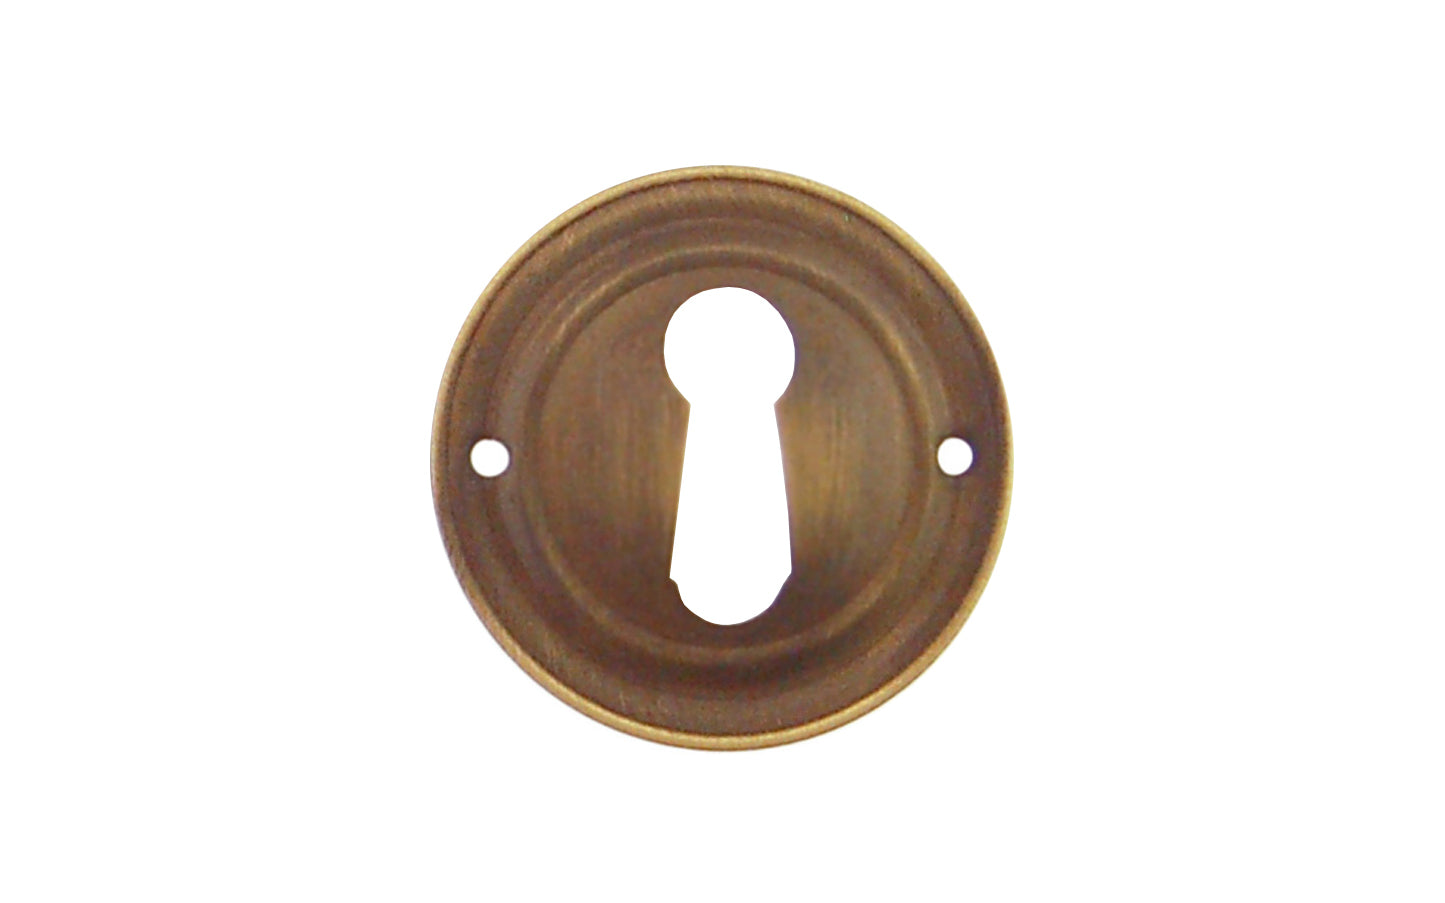 Vintage-style Hardware · This traditional & classic Stamped Brass Round Keyhole is an attractive & stylish keyhole piece made of quality stamped brass material with a nice trim, & adds some character & style to your cabinets, drawers, & furniture. Antique brass finish